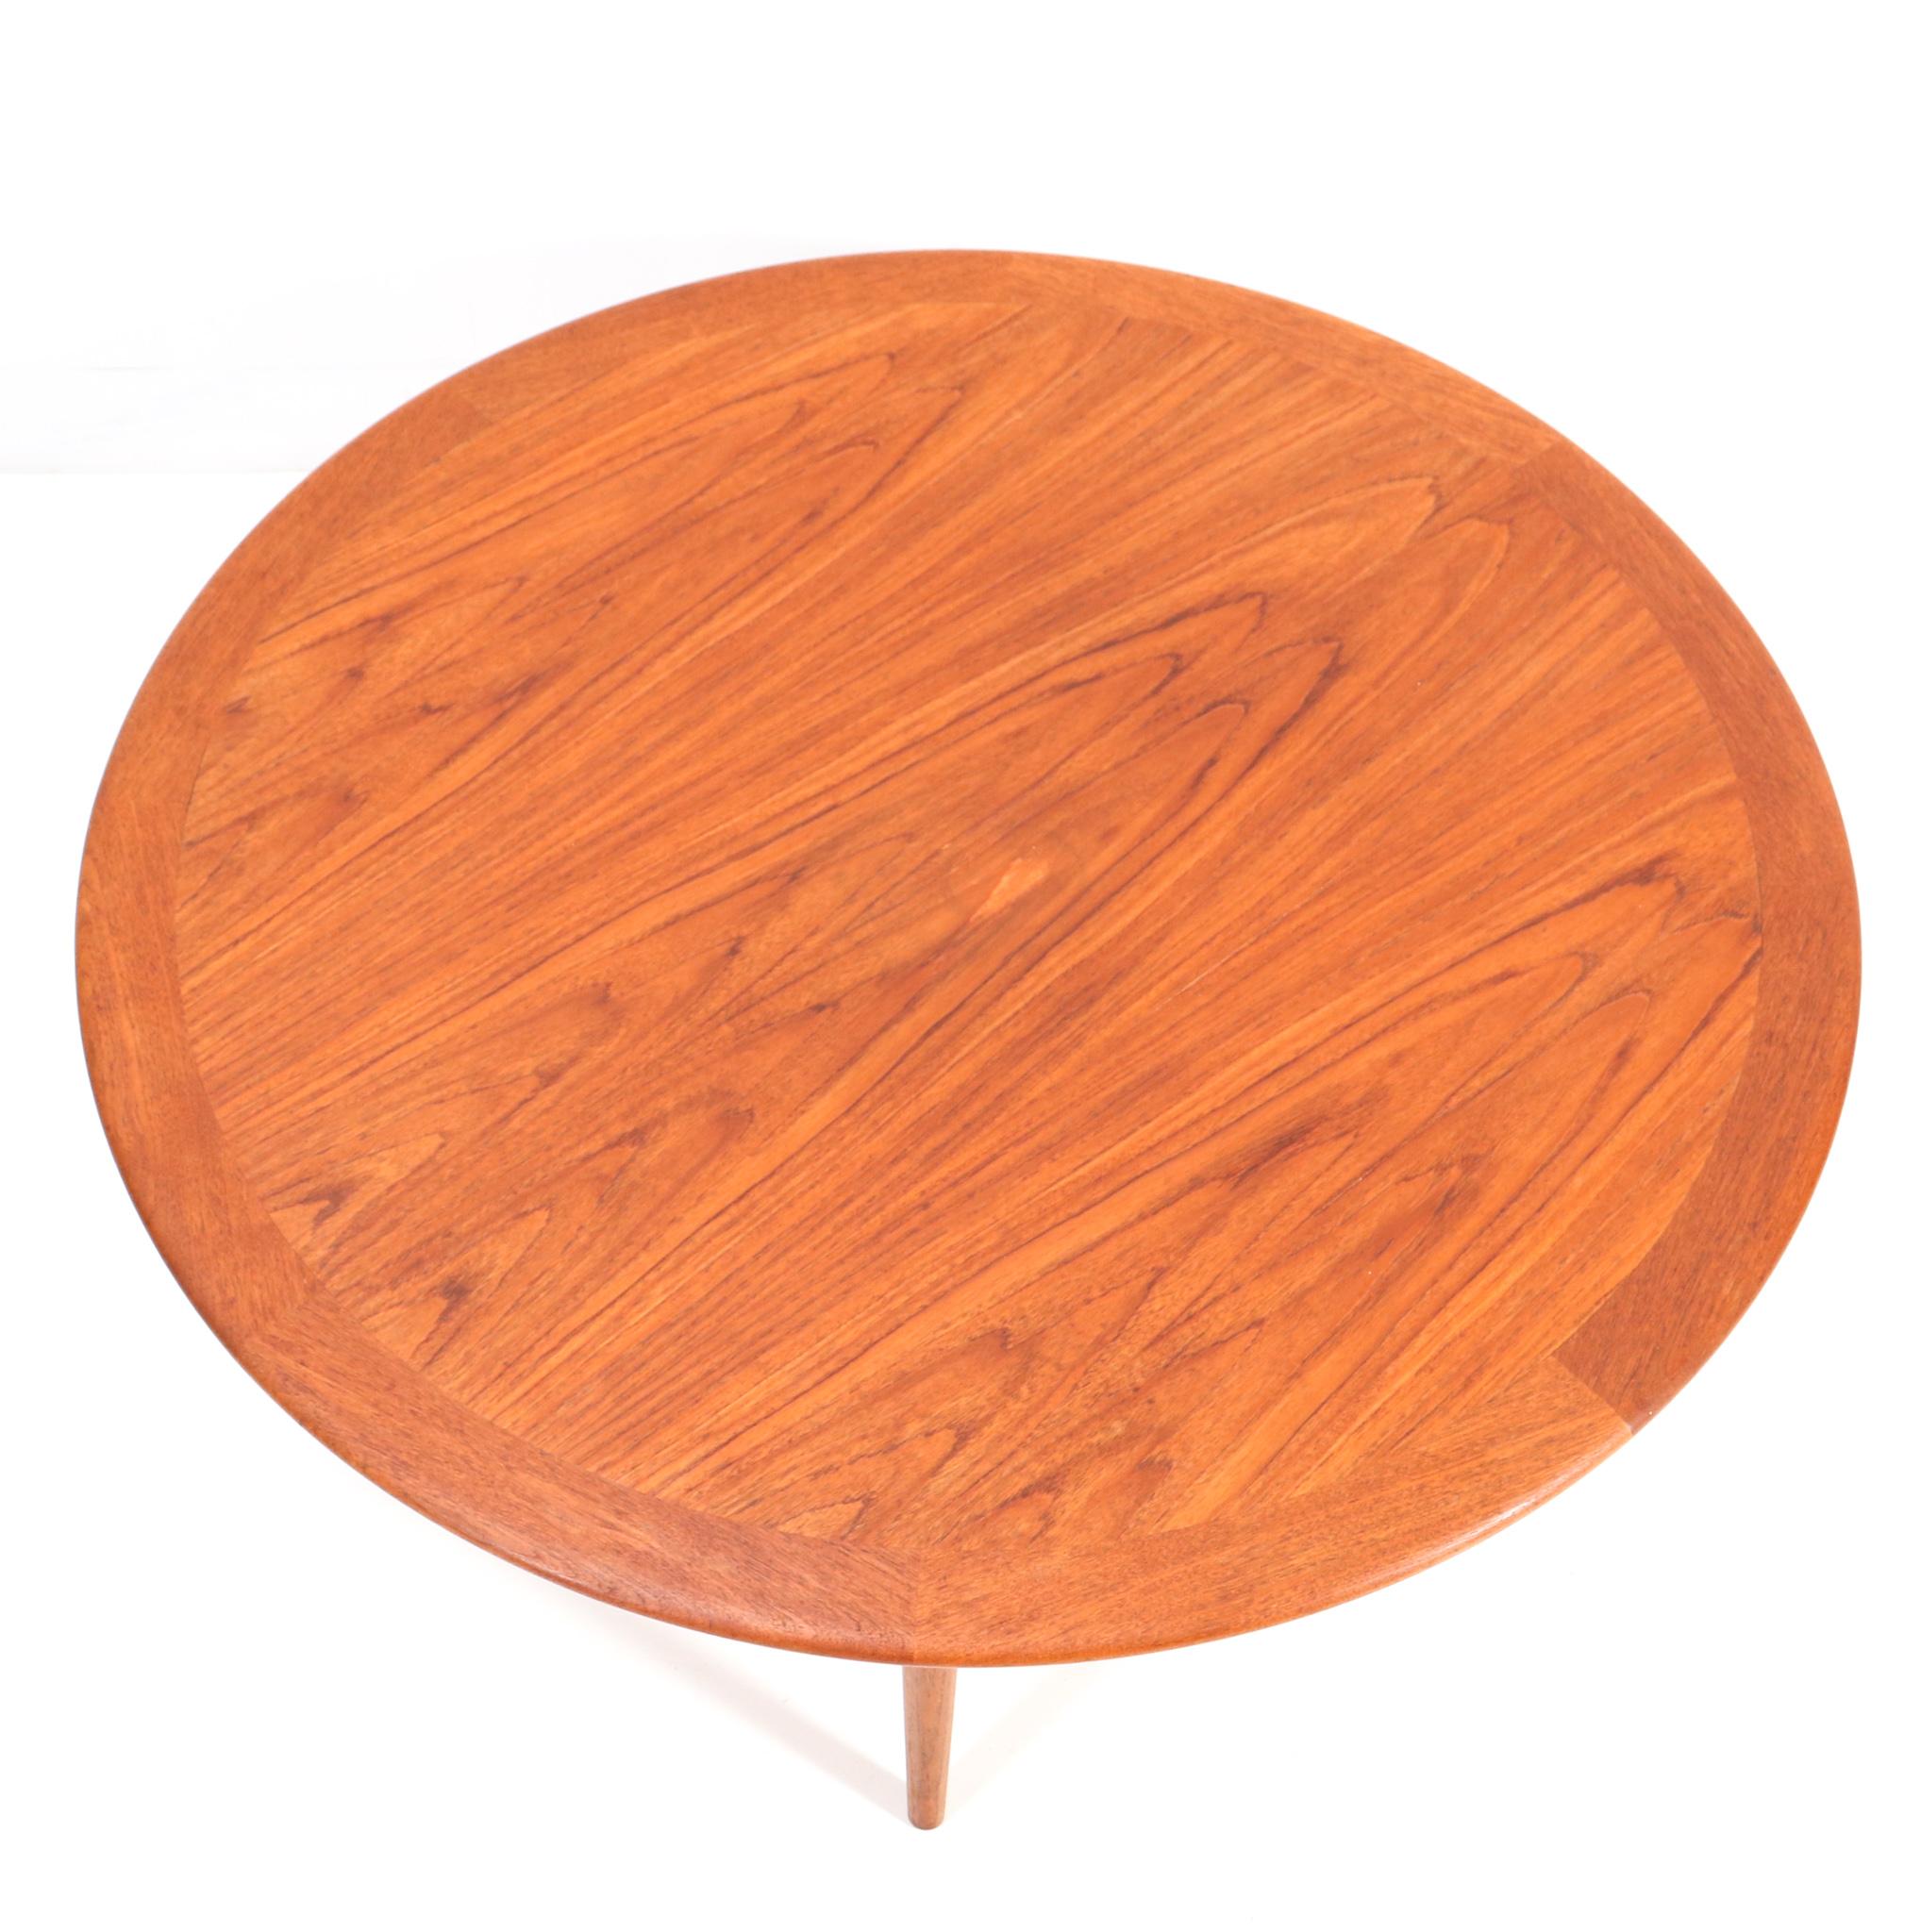 Mid-20th Century Mid-Century Modern Teak Coffee Table by Pander, 1960s For Sale